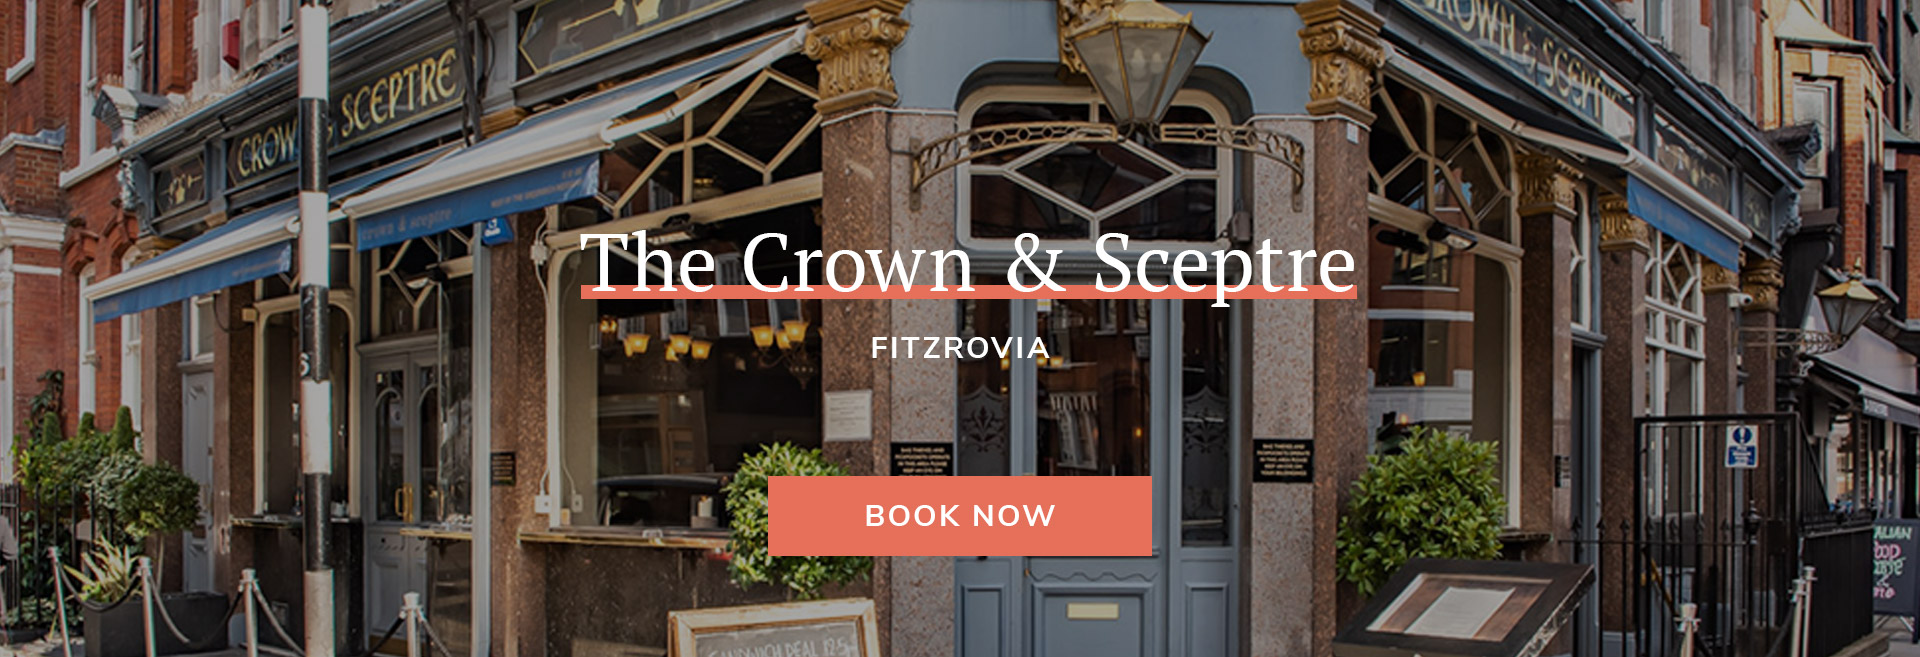 The Crown & Sceptre Banner 1